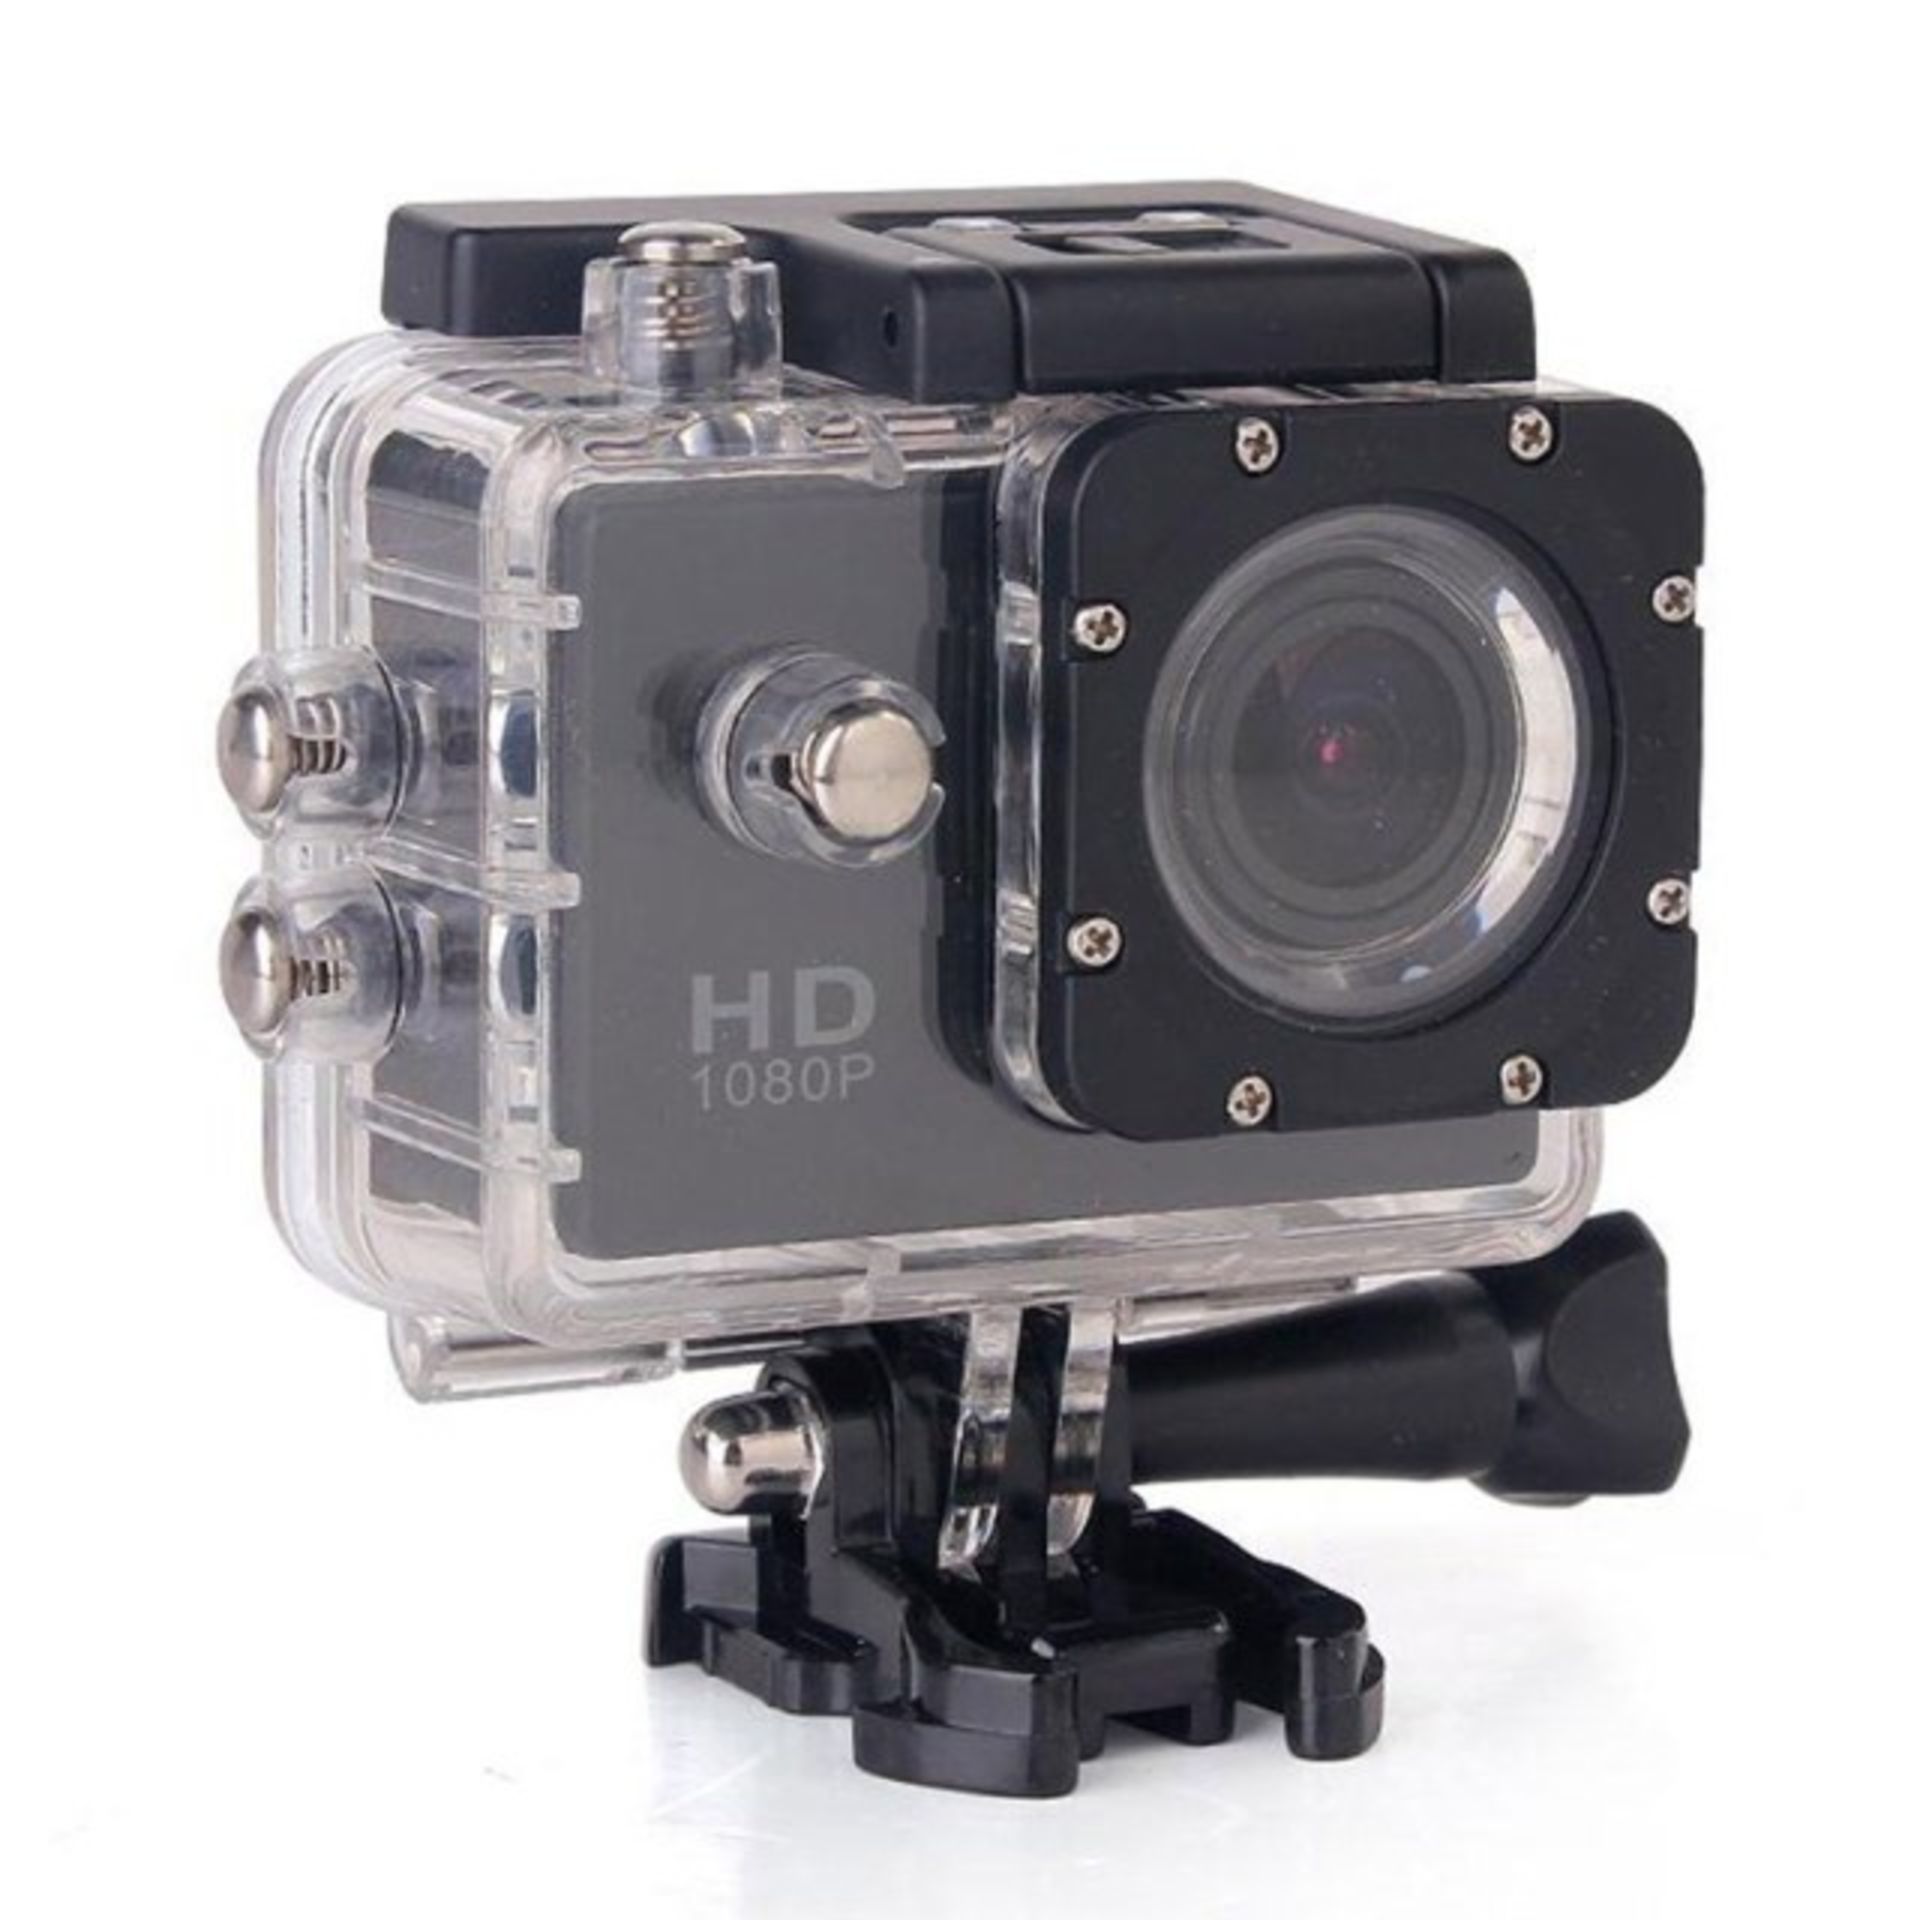 *TRADE QTY* Brand New Full HD 1080p Waterproof Action Camera With Box And Accessories - 30m